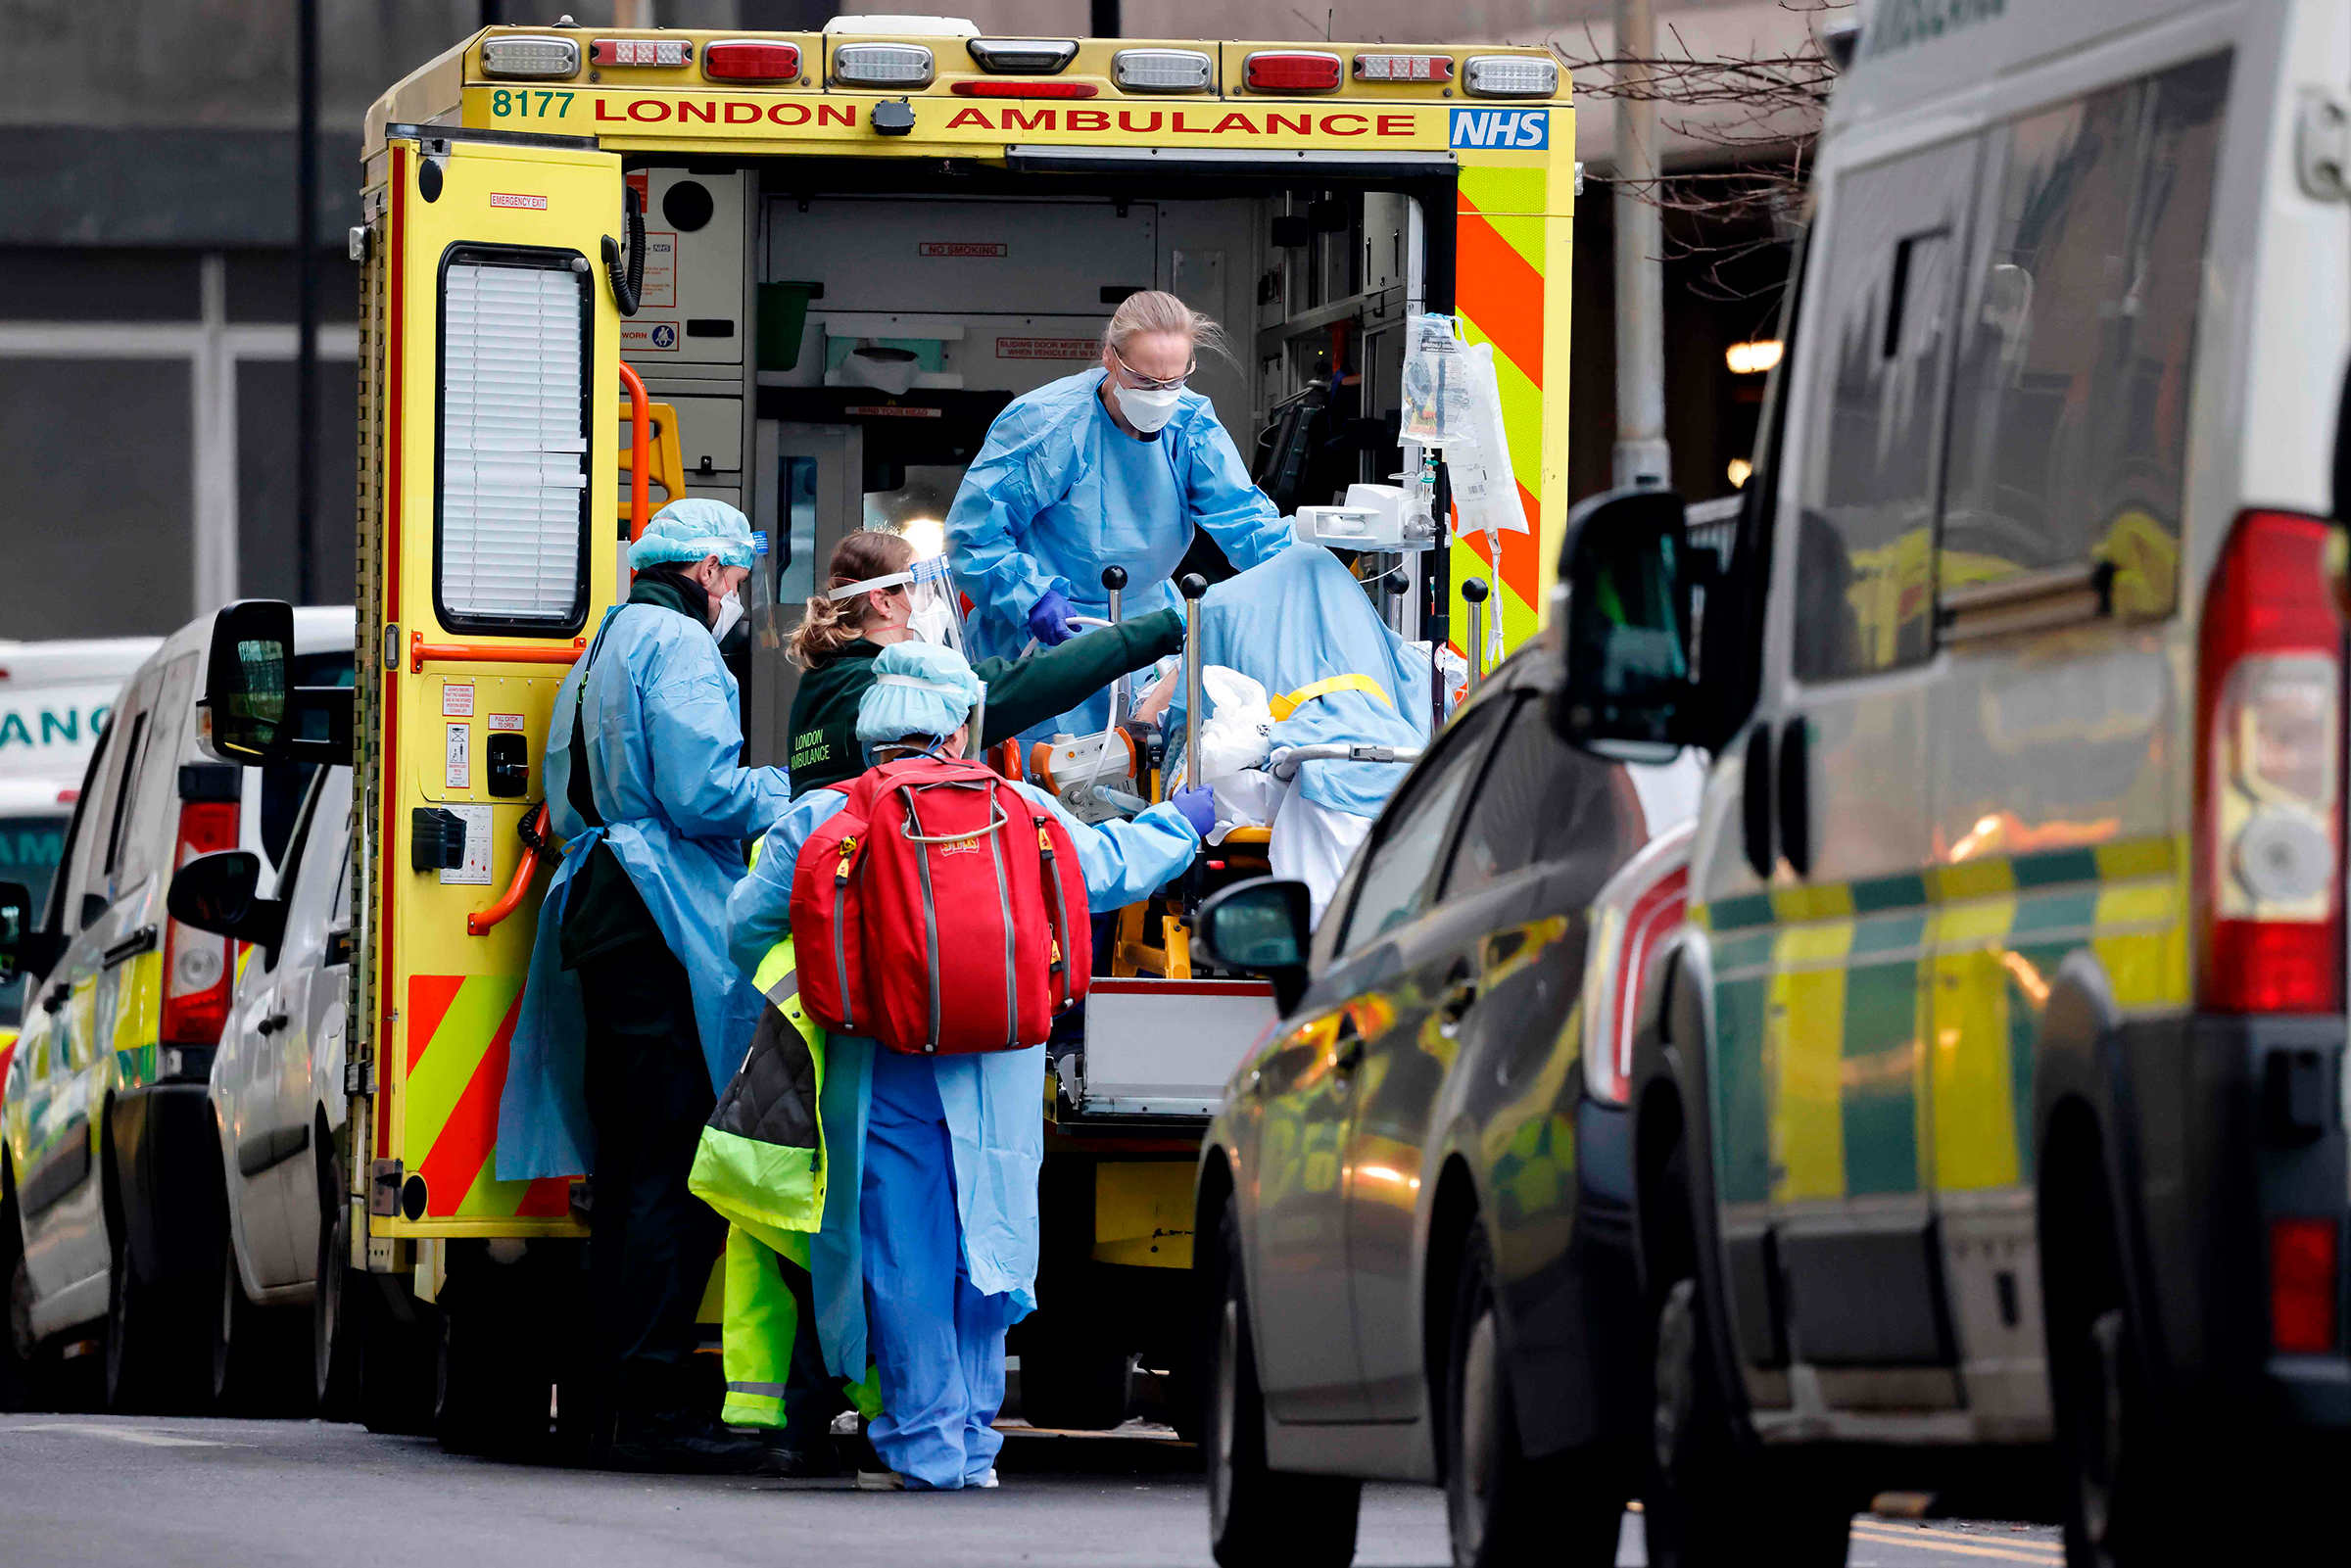 A patient is taken from an ambulance by staff wearing PPE equipment at the Royal Free Hospital, London, on Jan. 11 as surging cases of Covid-19 are placing health services under increasing pressure (Tolga Akmen—AFP/Getty Images)